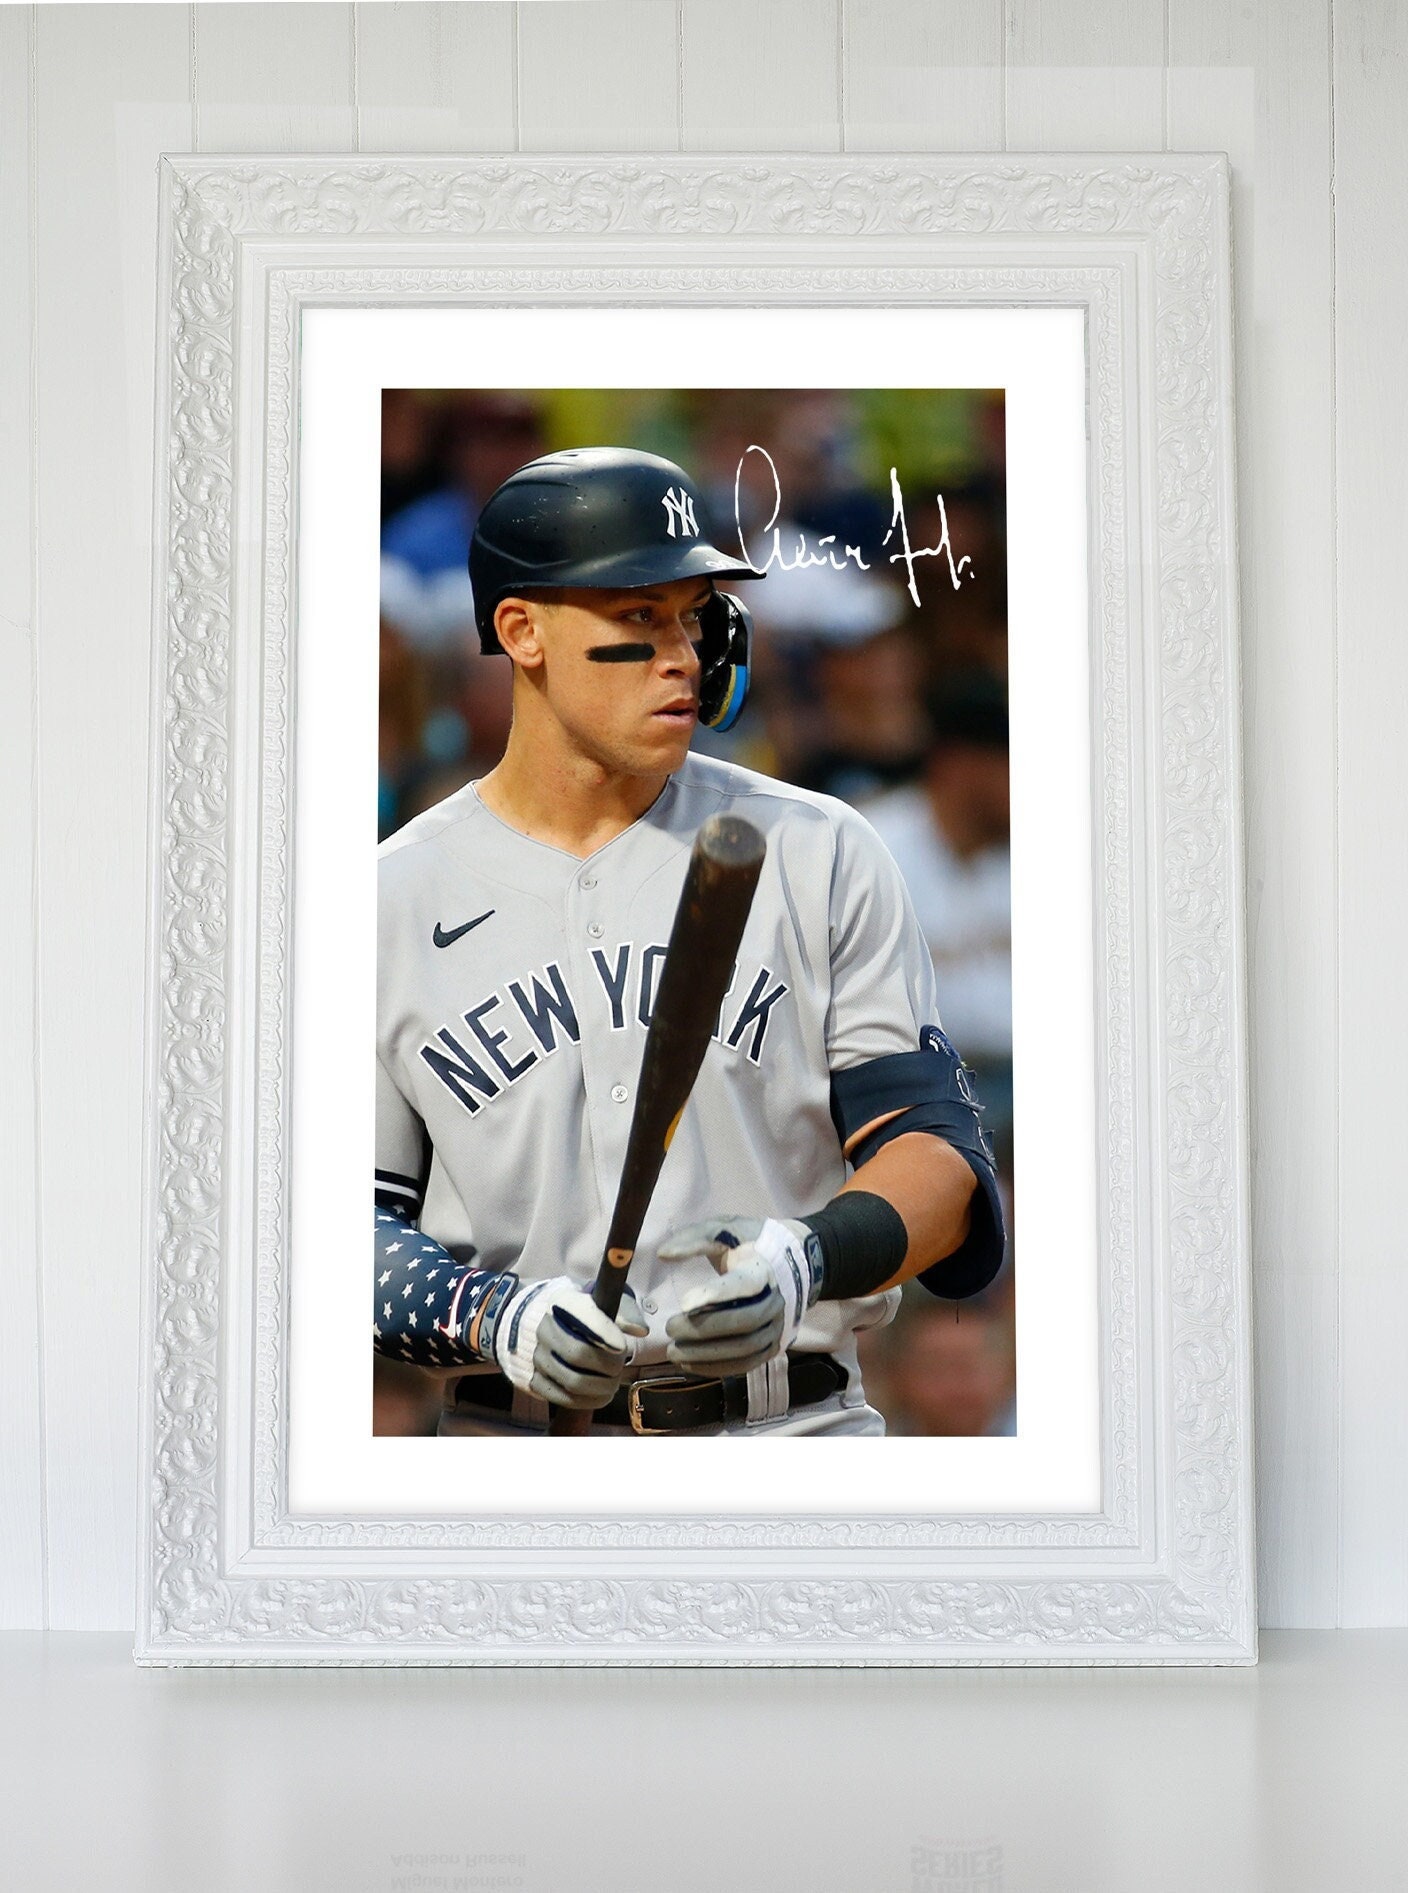 Aaron Judge New York Yankees Framed 16 x 20 All Rise Collage with Printed  Replica Draft Day Card